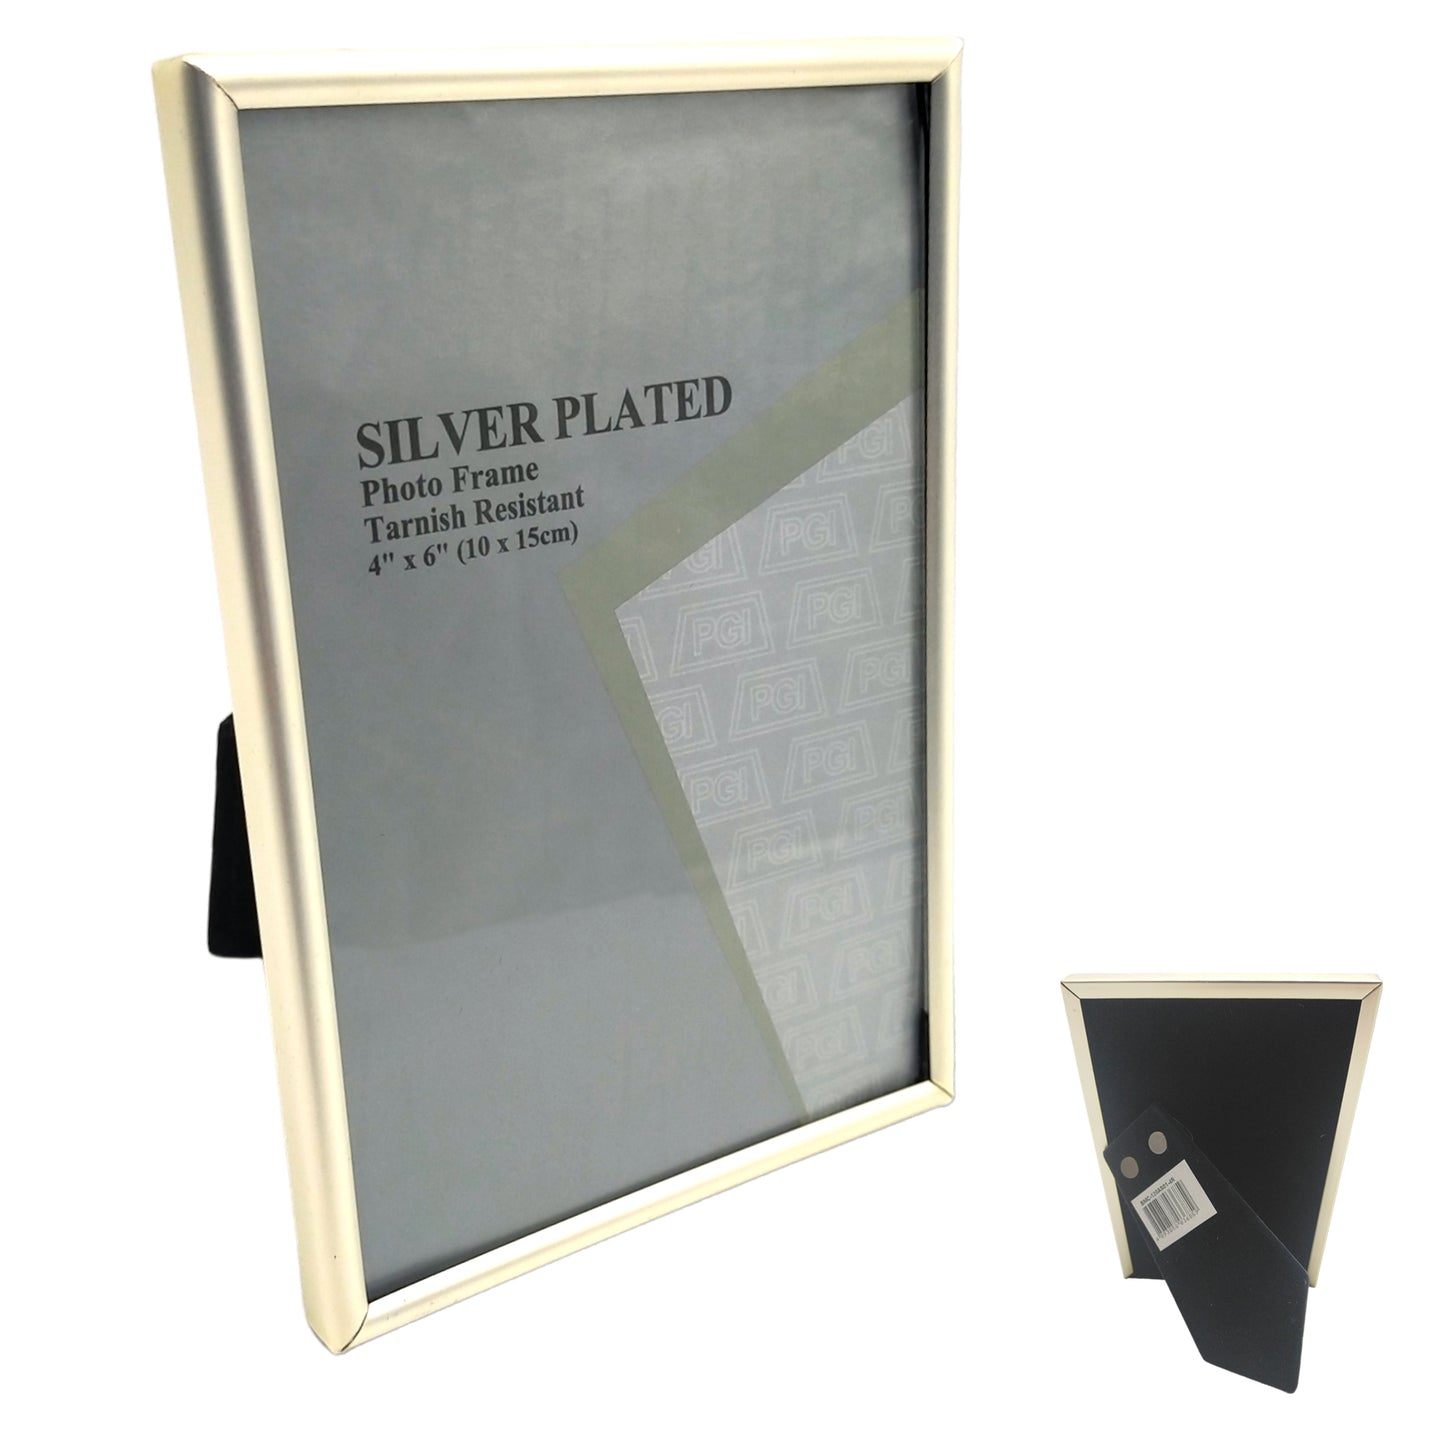 Silver Plated Photo Frame 4"x6"